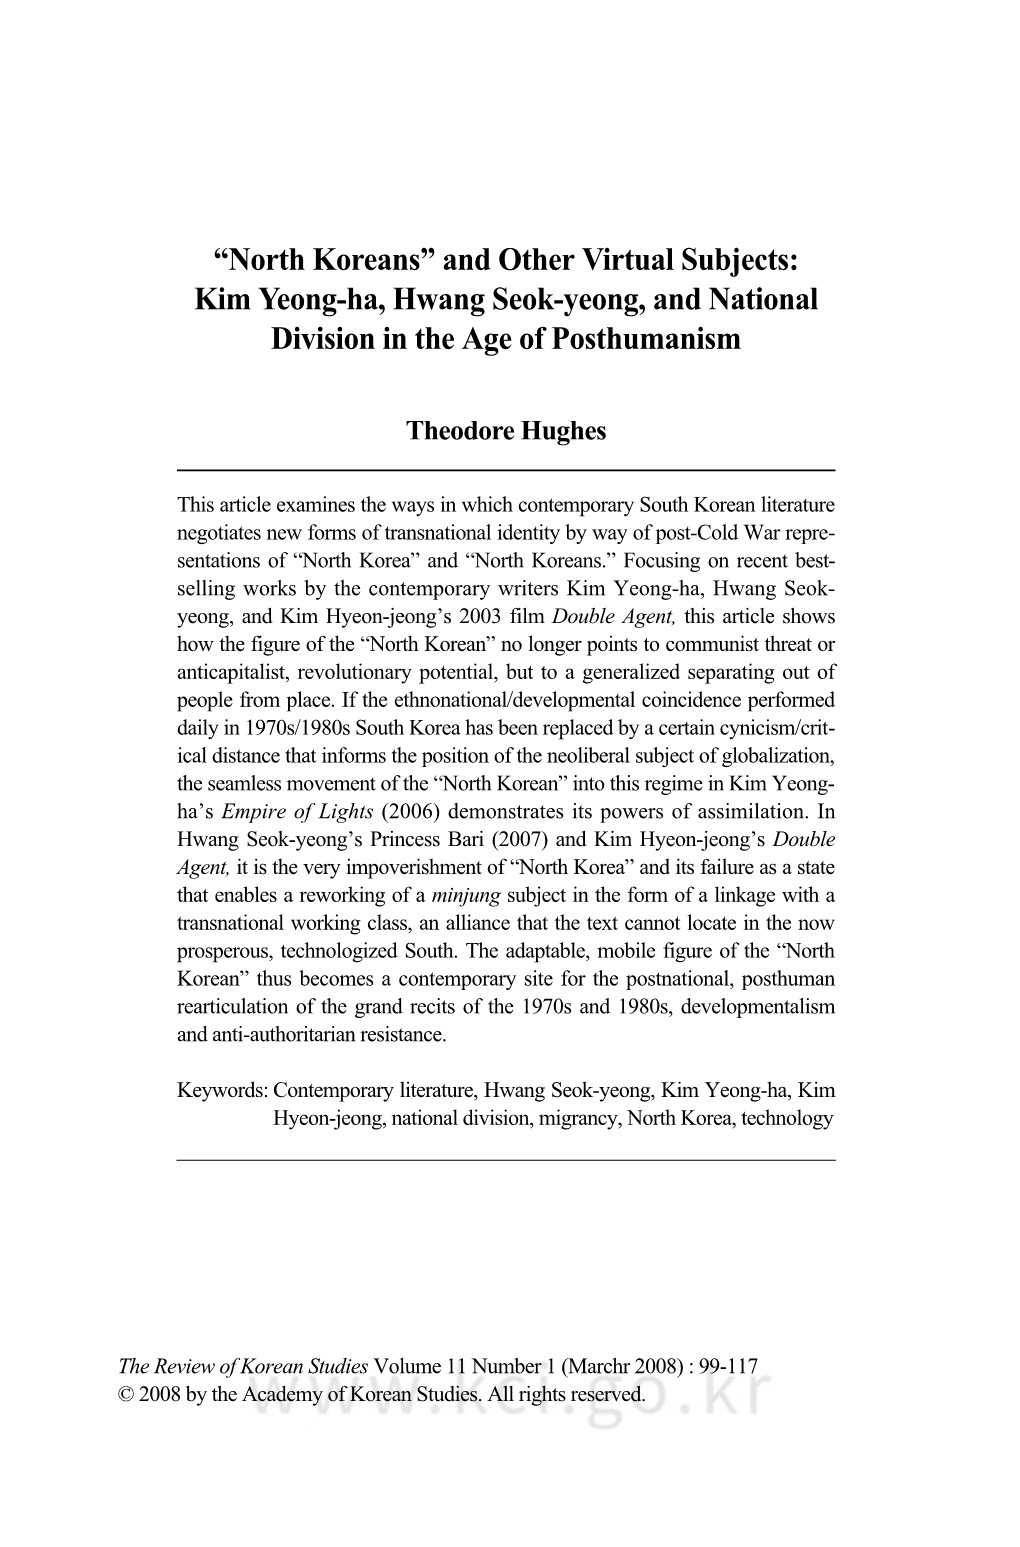 “North Koreans” and Other Virtual Subjects: Kim Yeong-Ha, Hwang Seok-Yeong, and National Division in the Age of Posthumanism